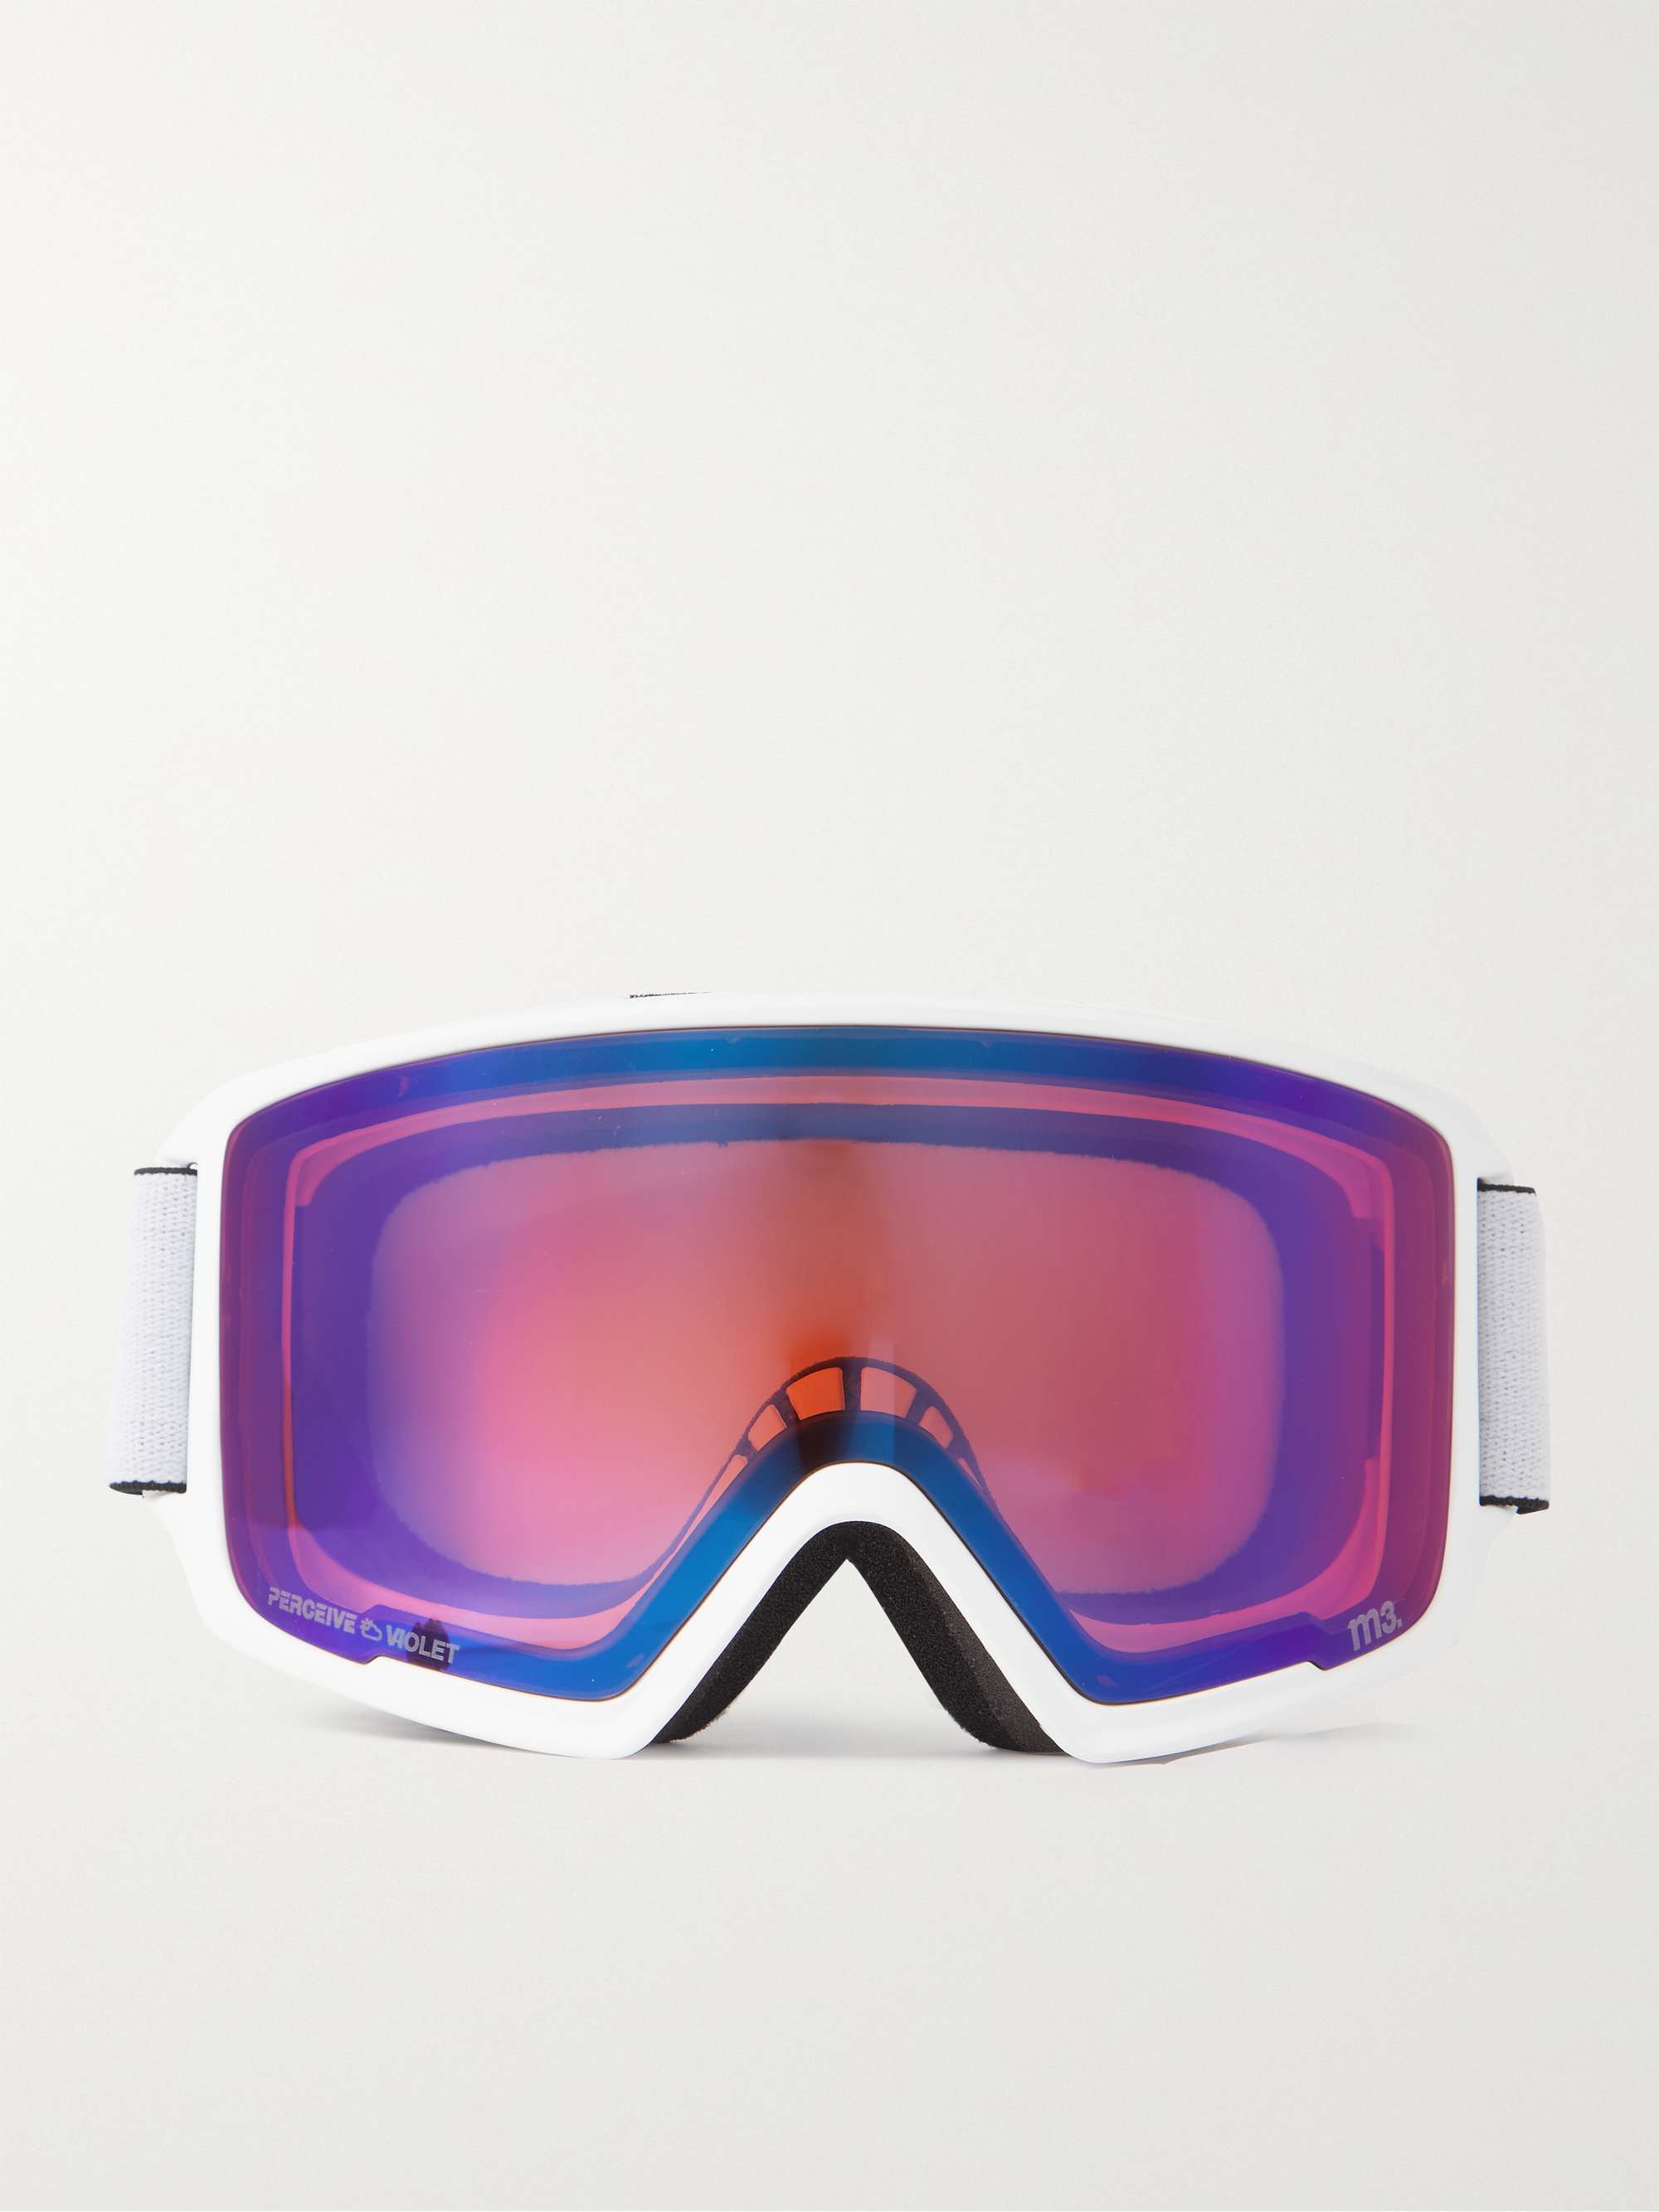 ANON M3 Ski Goggles and Stretch-Jersey Face Mask